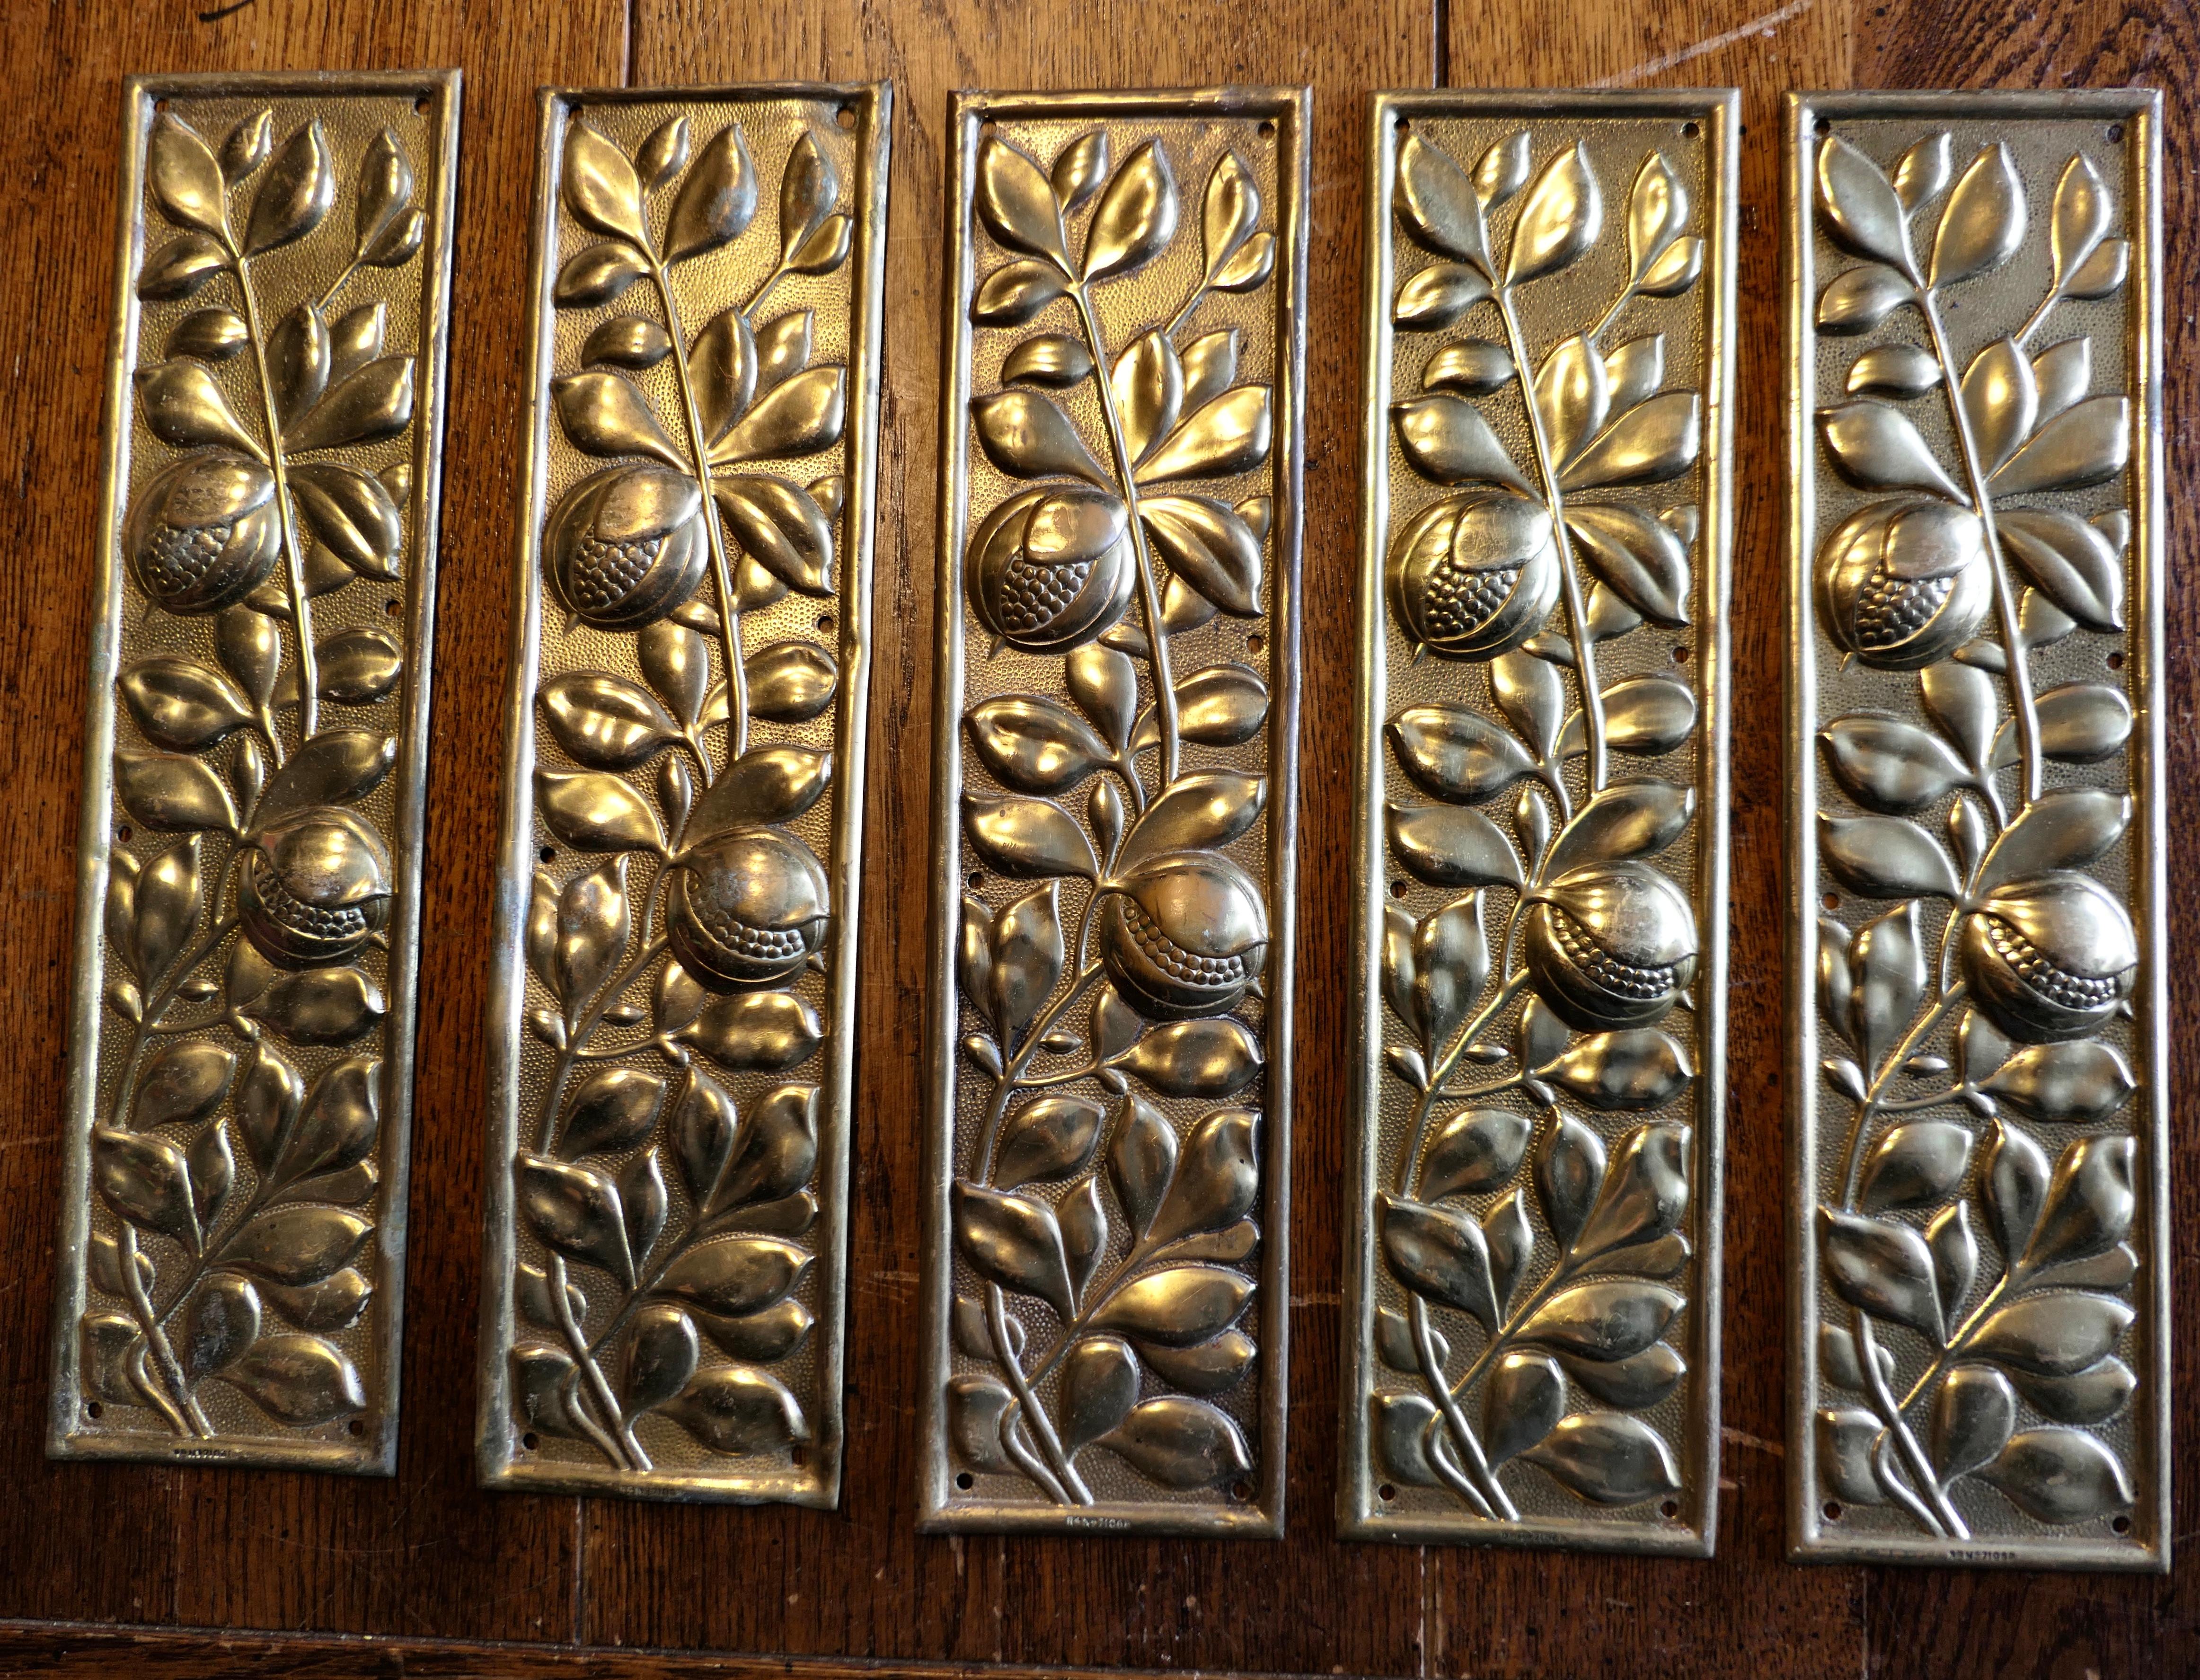 Keswick School Arts and Crafts Brass Door Finger Plates, Door-furniture 

There are 5 identical plates in this set, the are made in quality brass and they are stamped with their registration numbers, they are decorated with leaved and stylised seed